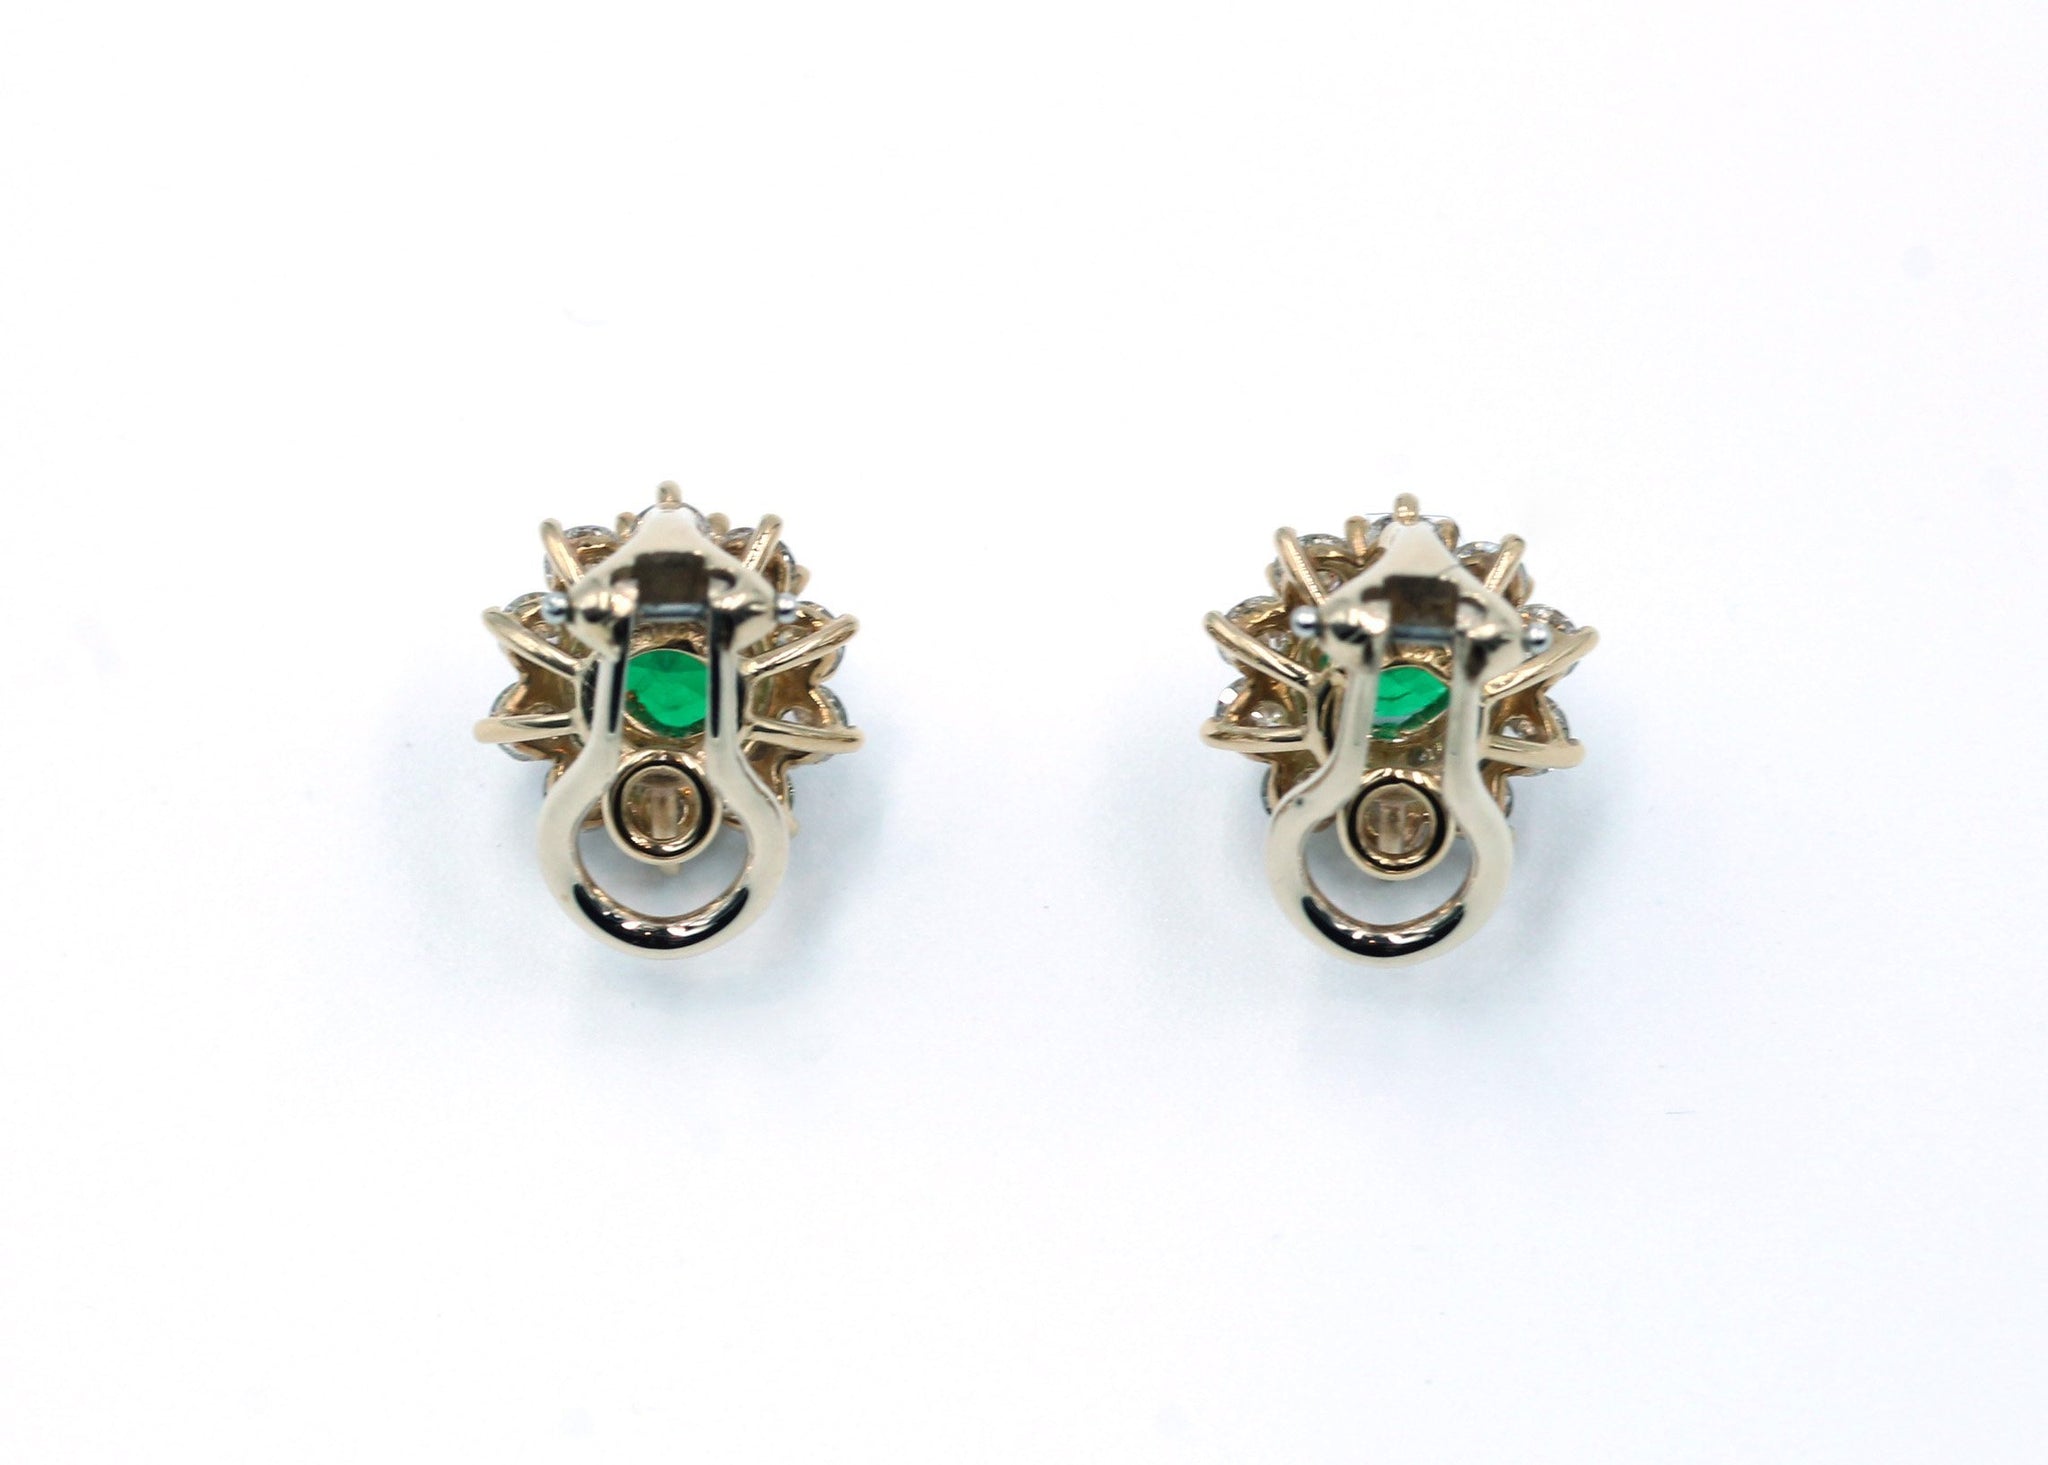 Vintage Tiffany Emerald and Diamond Earrings, SOLD